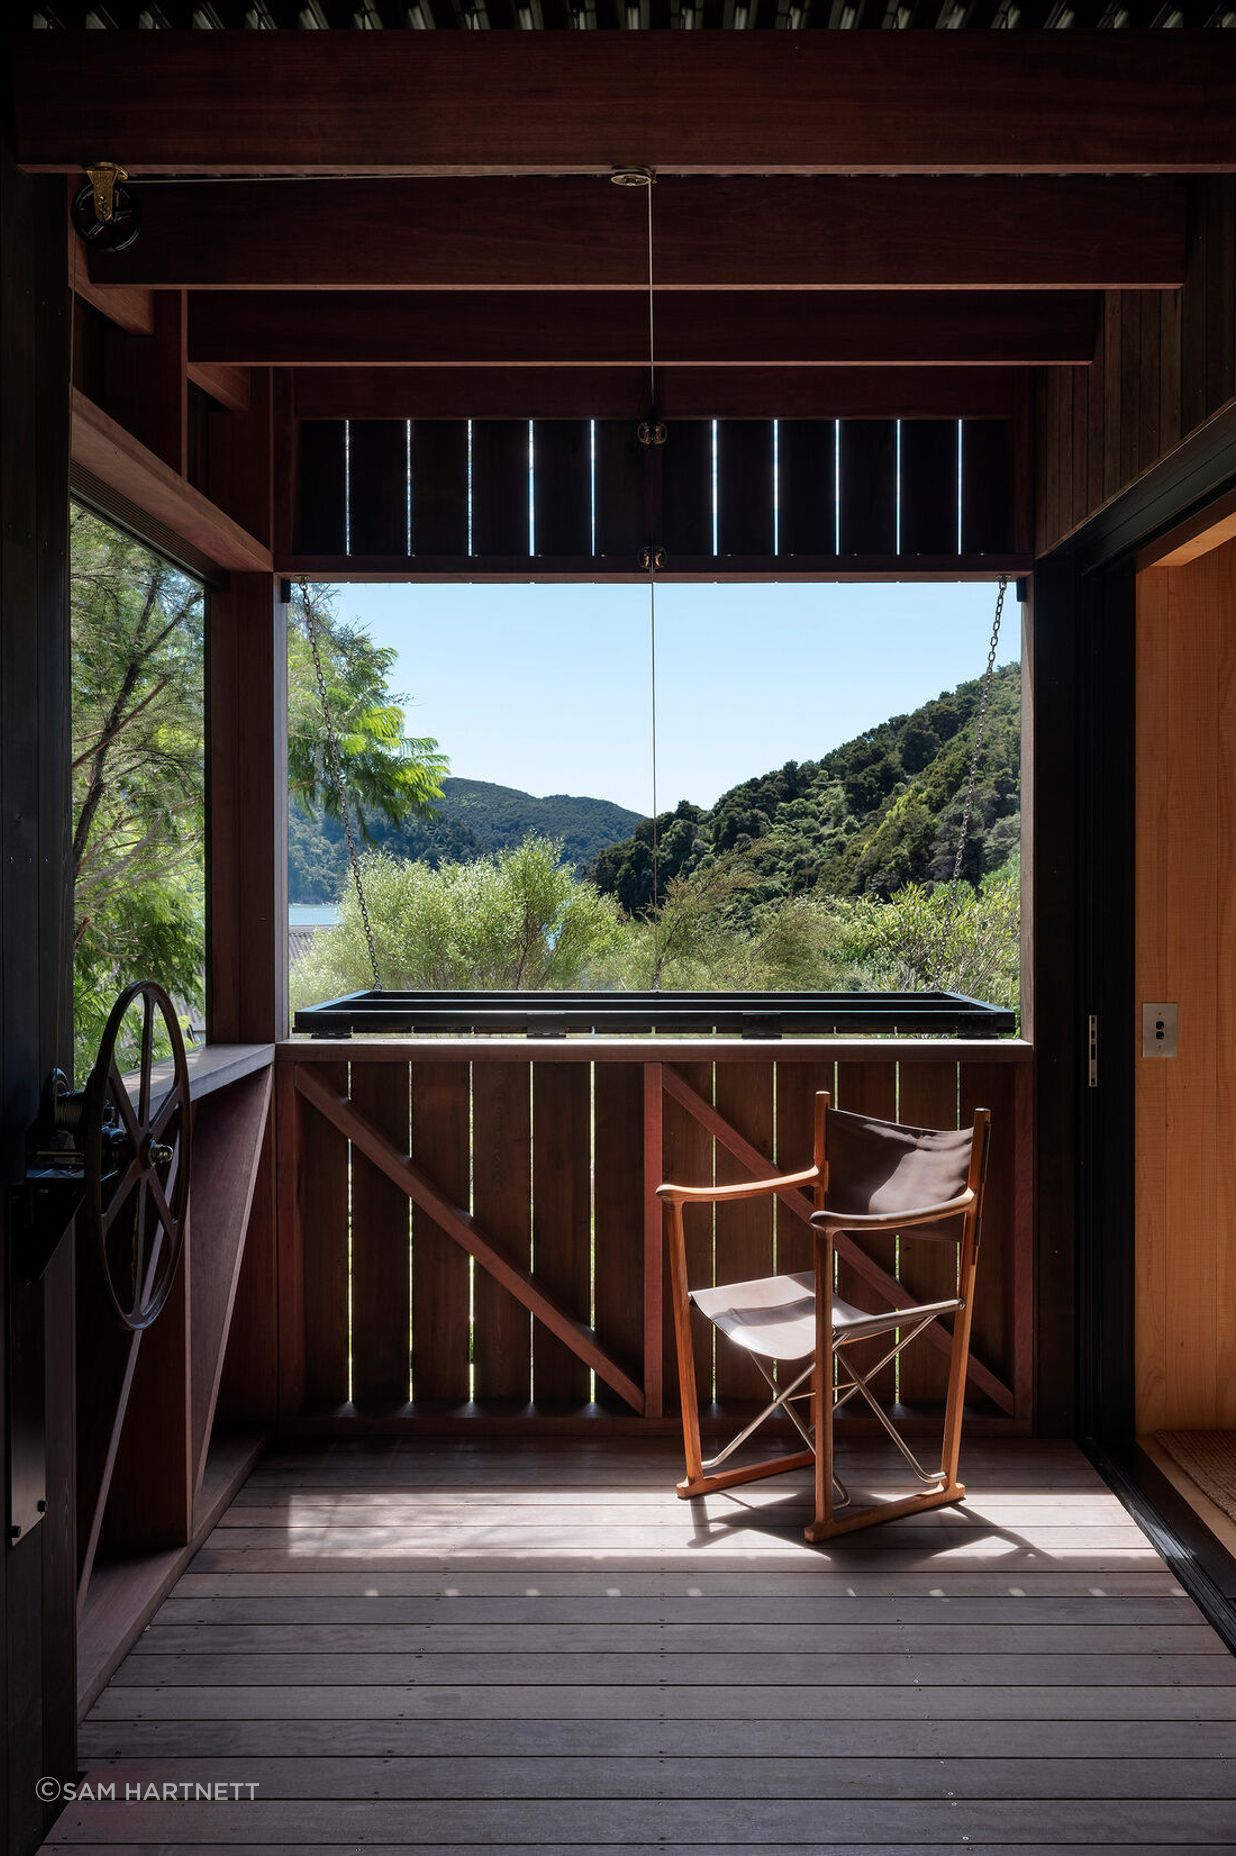 The scent of locally sourced totara and macrocarpa permeates the interior spaces.